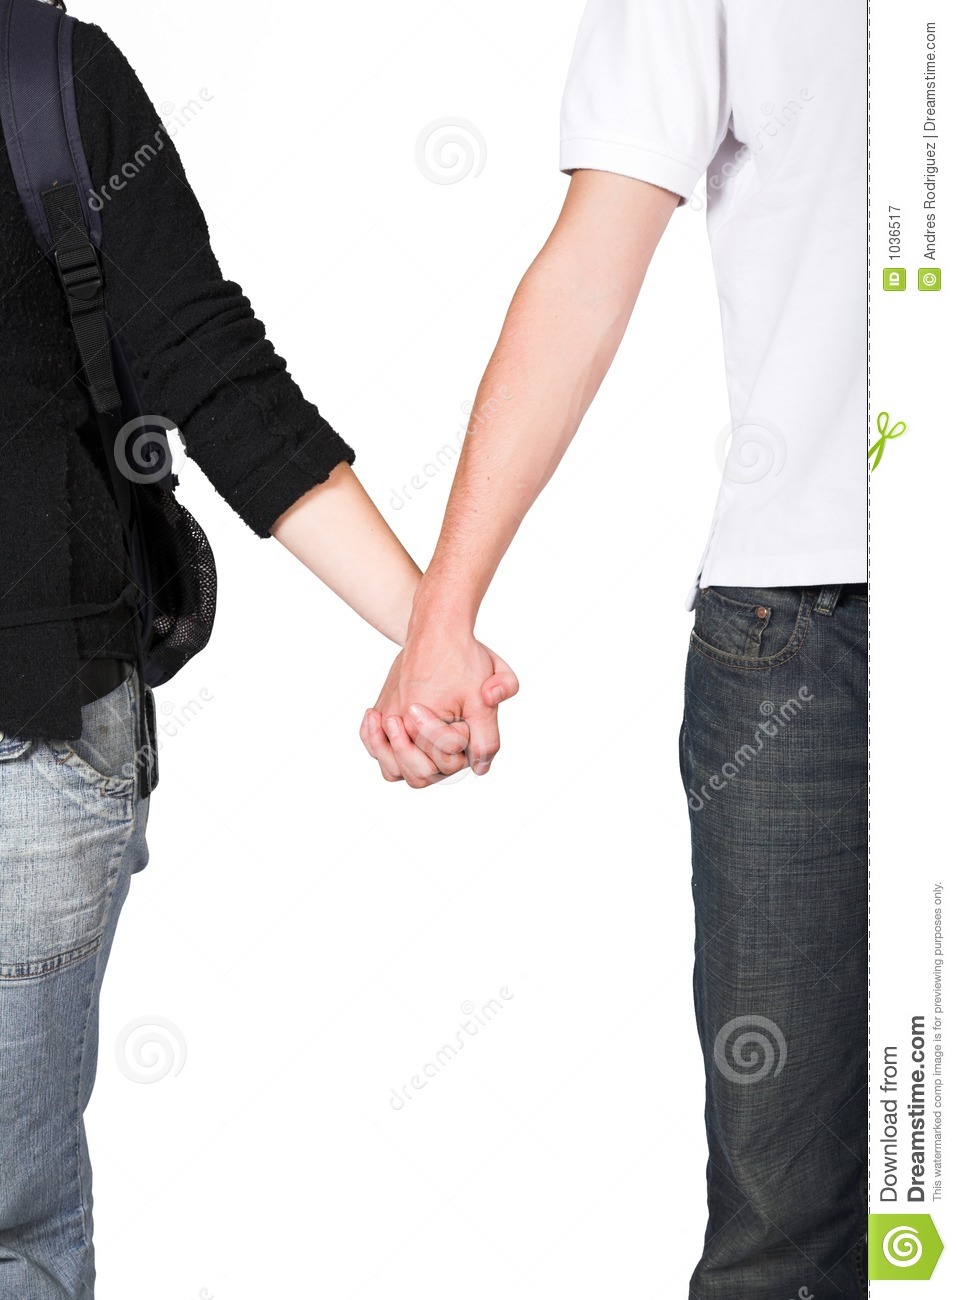 Students Holding Hands Royalty Free Stock Photography   Image  1036517